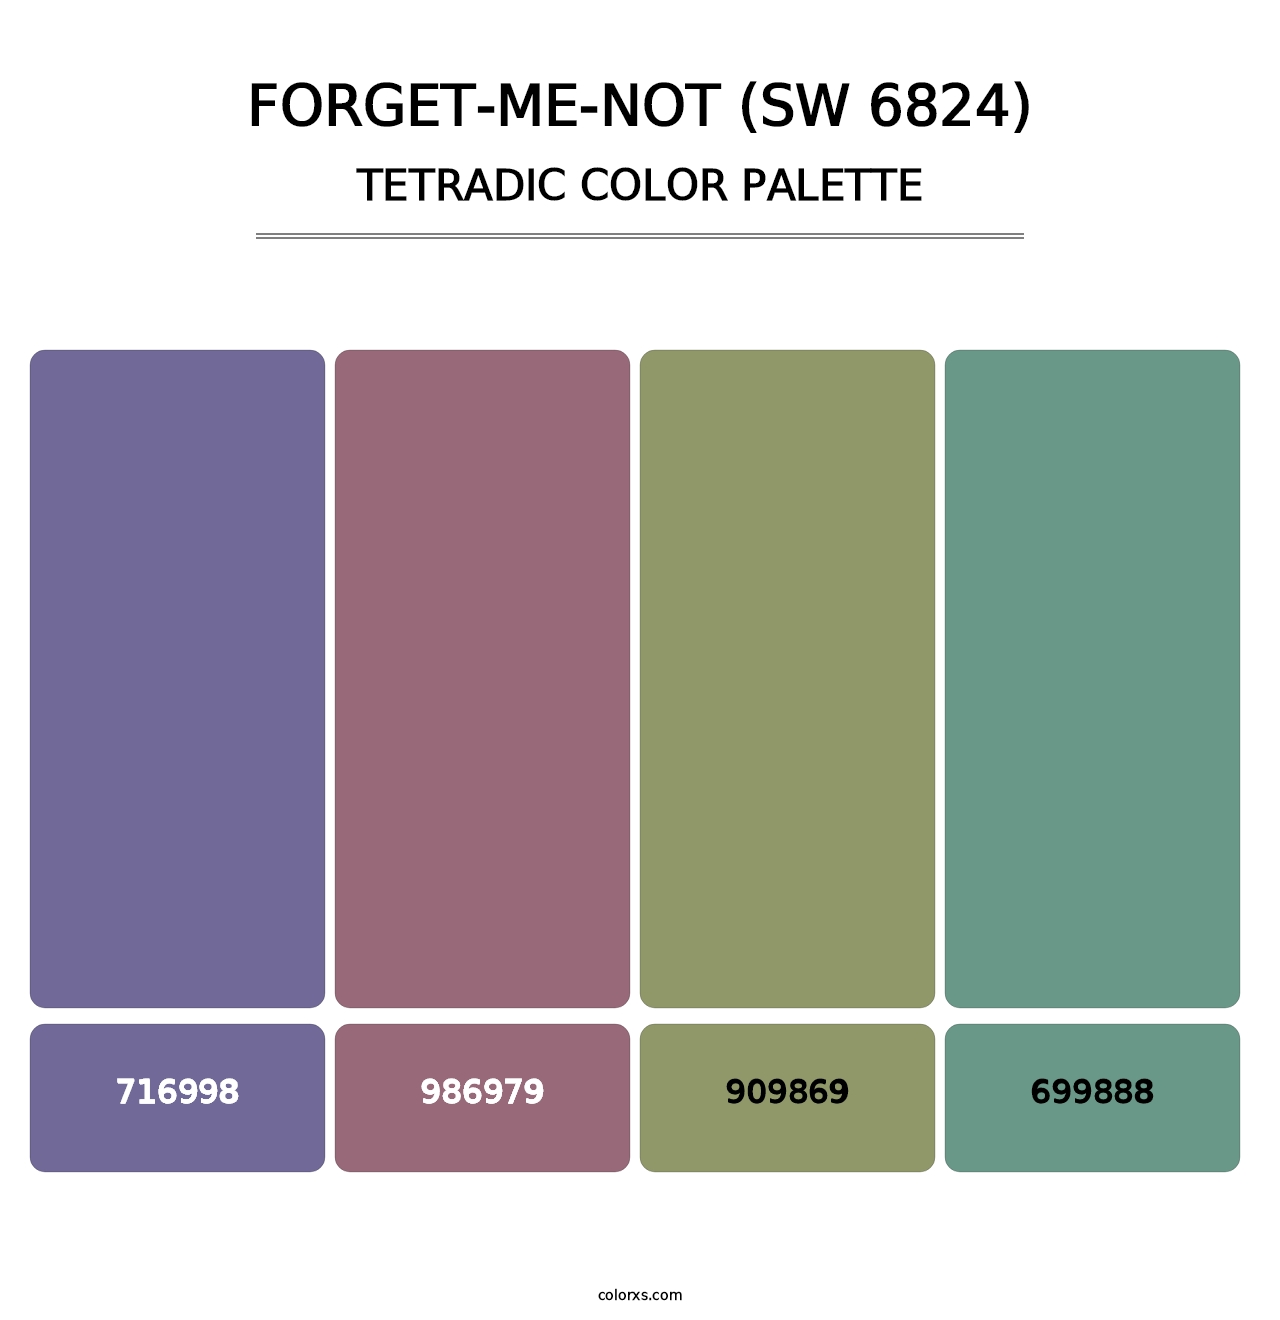 Forget-Me-Not (SW 6824) - Tetradic Color Palette